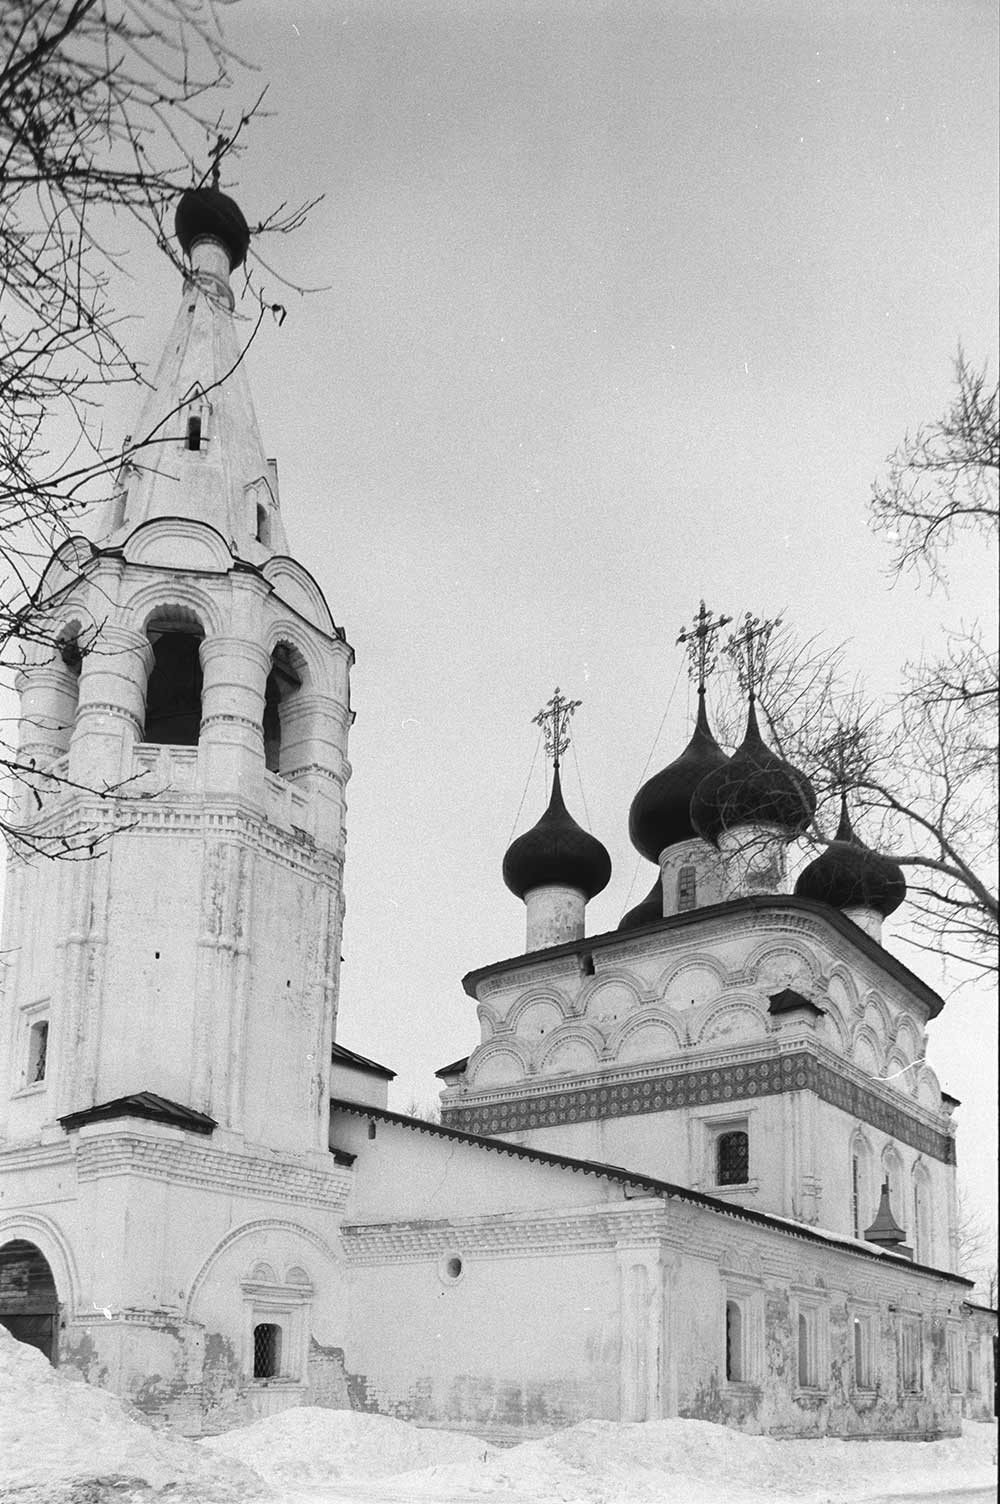 Church of the Most Merciful Savior, southwest view with bell tower. March 3, 1998.